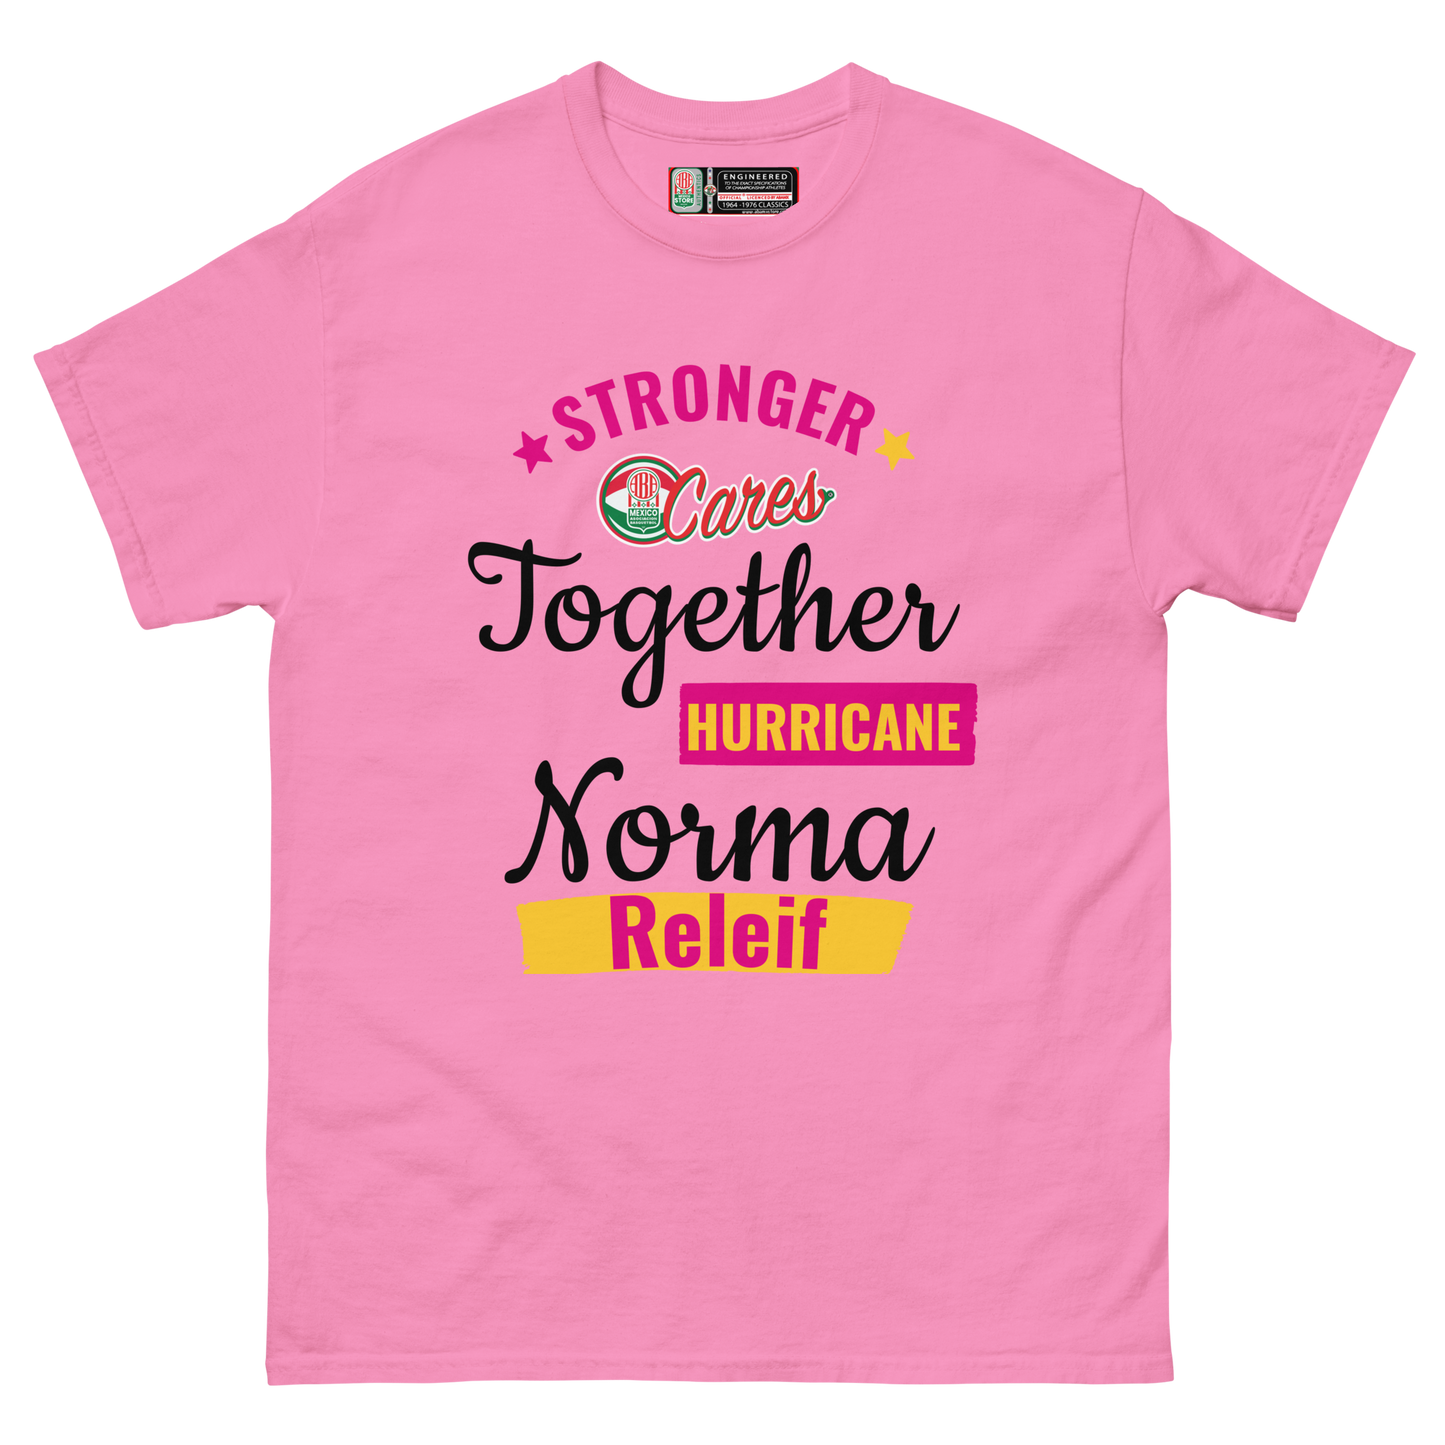 "Stronger Together: ABAMX Cares - Hurricane Norma Relief"